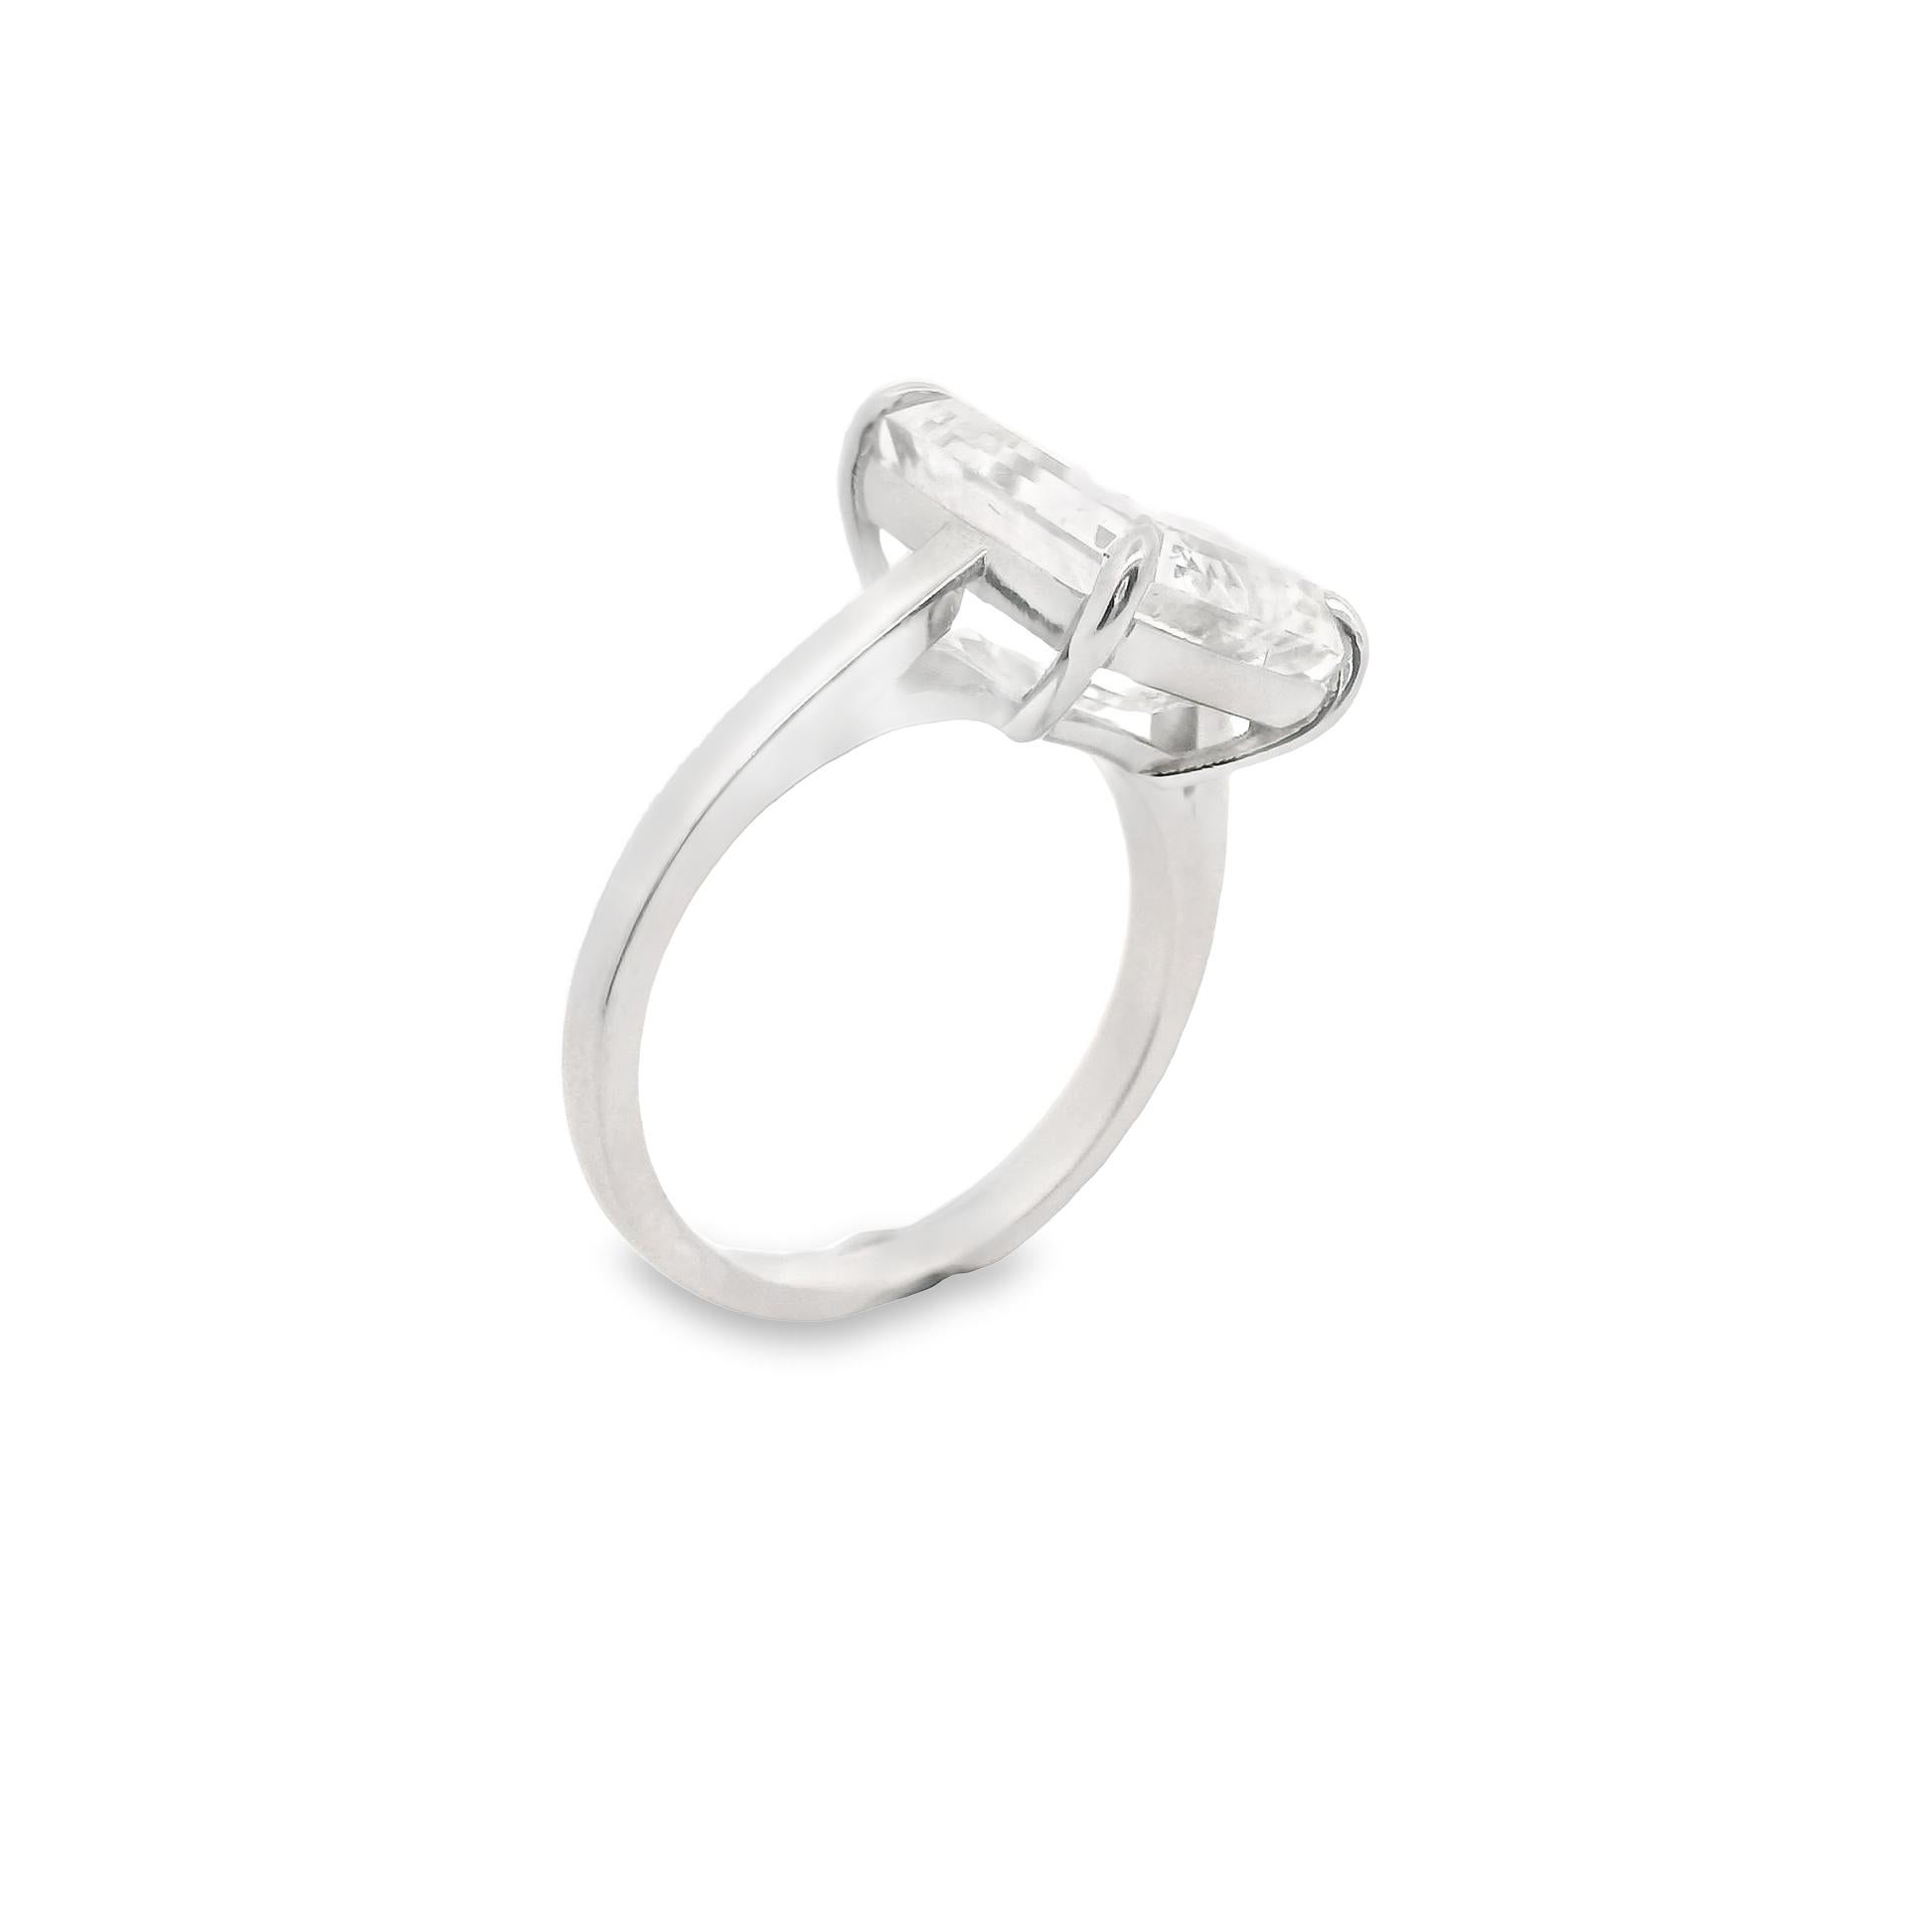 A simple yet striking ring featuring a 6.58 carat emerald cut diamond graded by the GIA as a H color with VS1 clarity, a marvelous stone. The simple four prong platinum setting allows the bright clean diamond to showcase its natural beauty. The